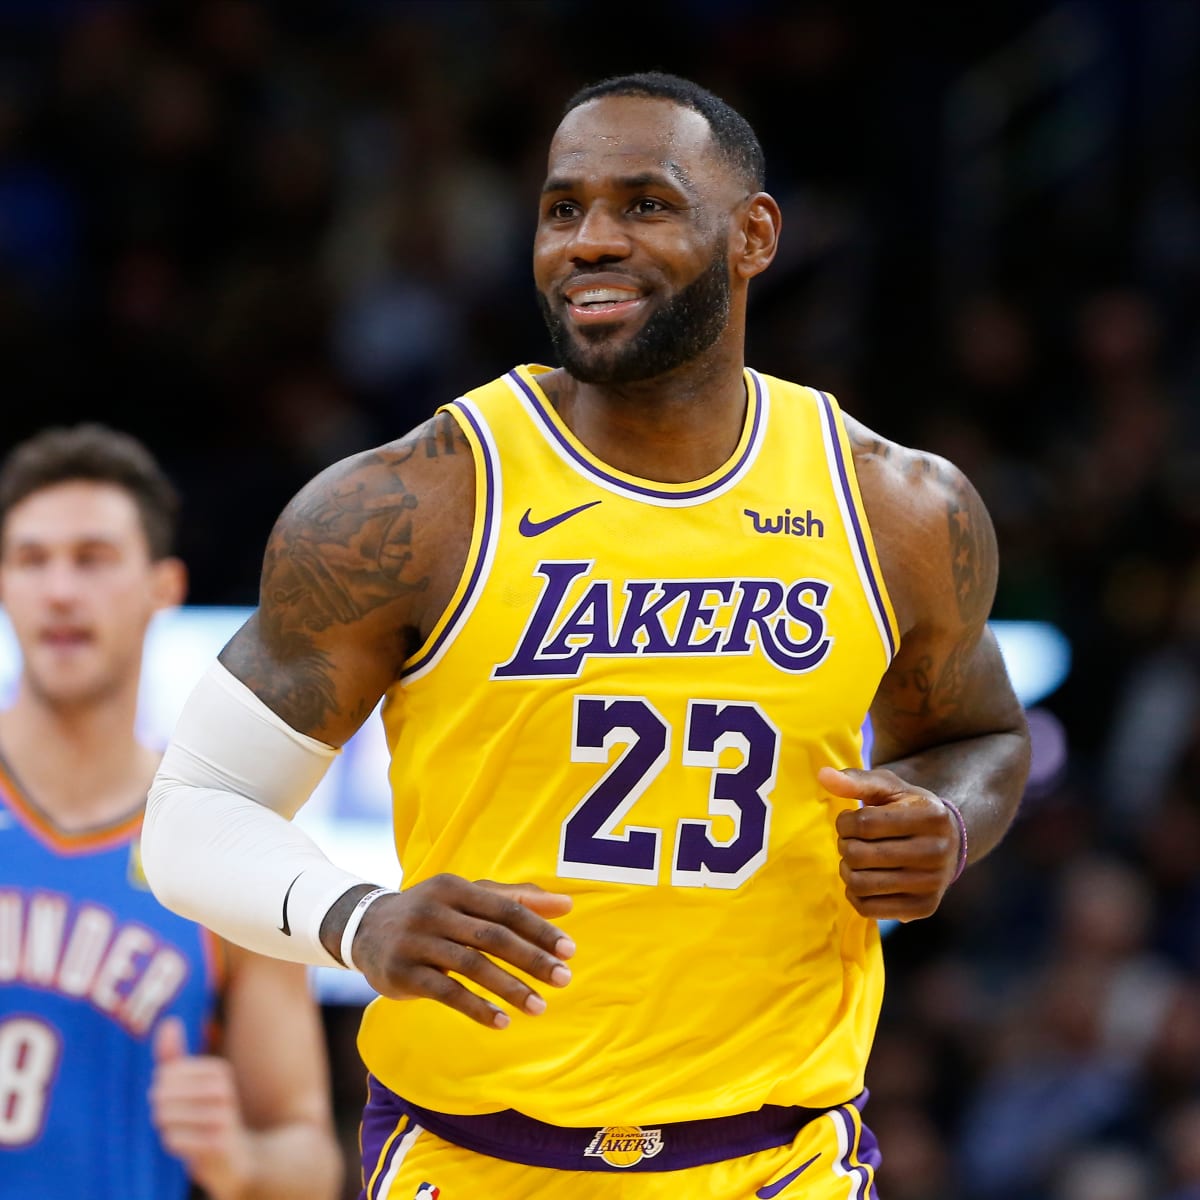 LeBron vows to never miss NBA Playoffs again in impassioned tweet